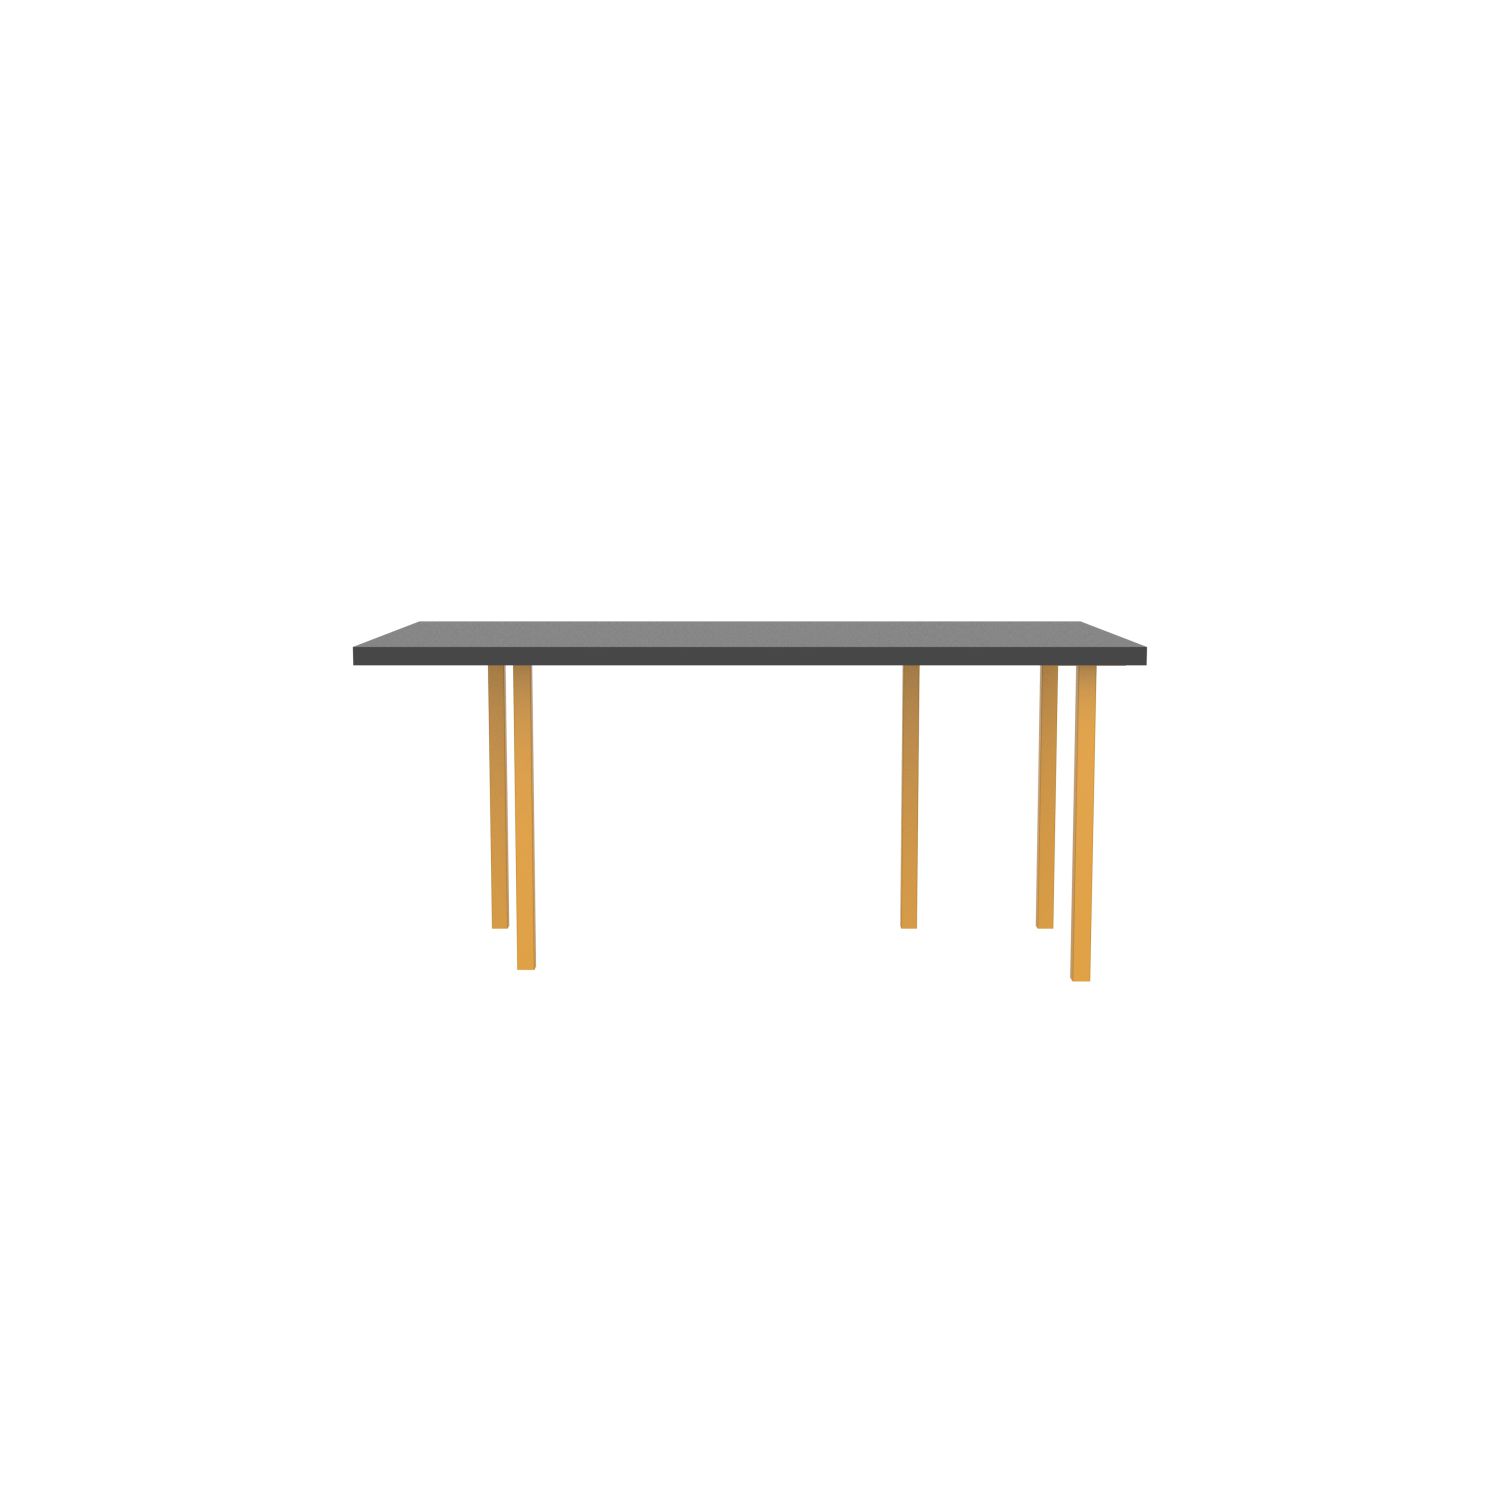 lensvelt bbrand table five fixed heigt 915x172 hpl black 50 mm price level 1 yellow ral1004